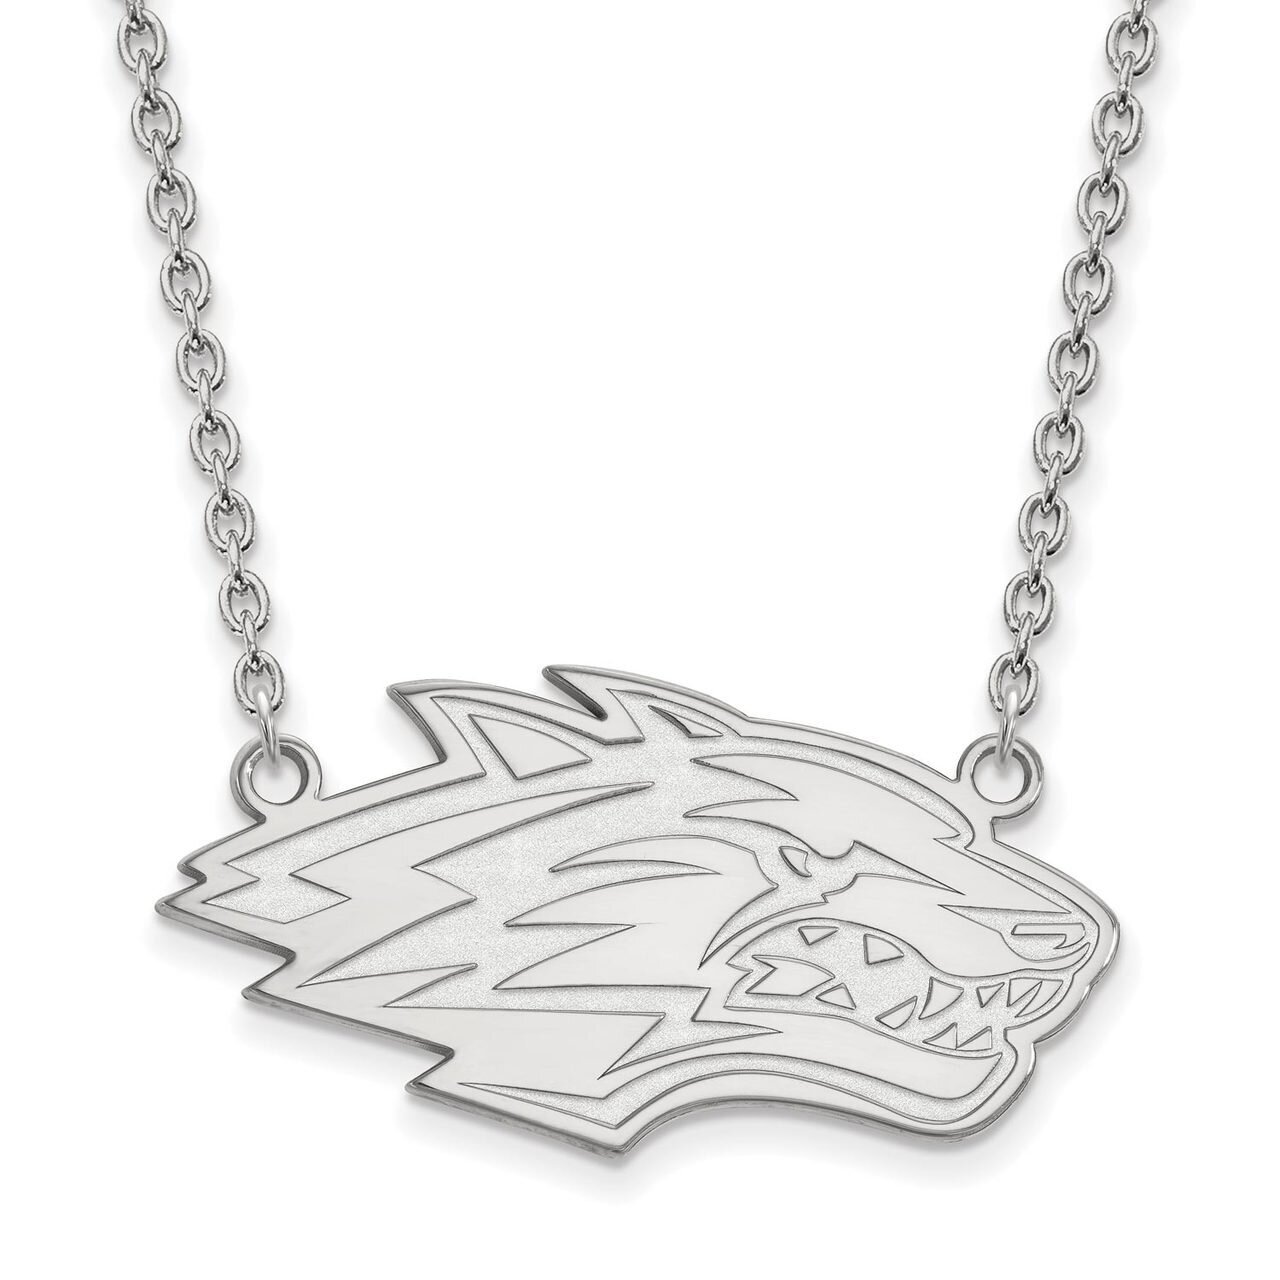 University of New Mexico Large Pendant with Chain Necklace Sterling Silver SS009UNM-18